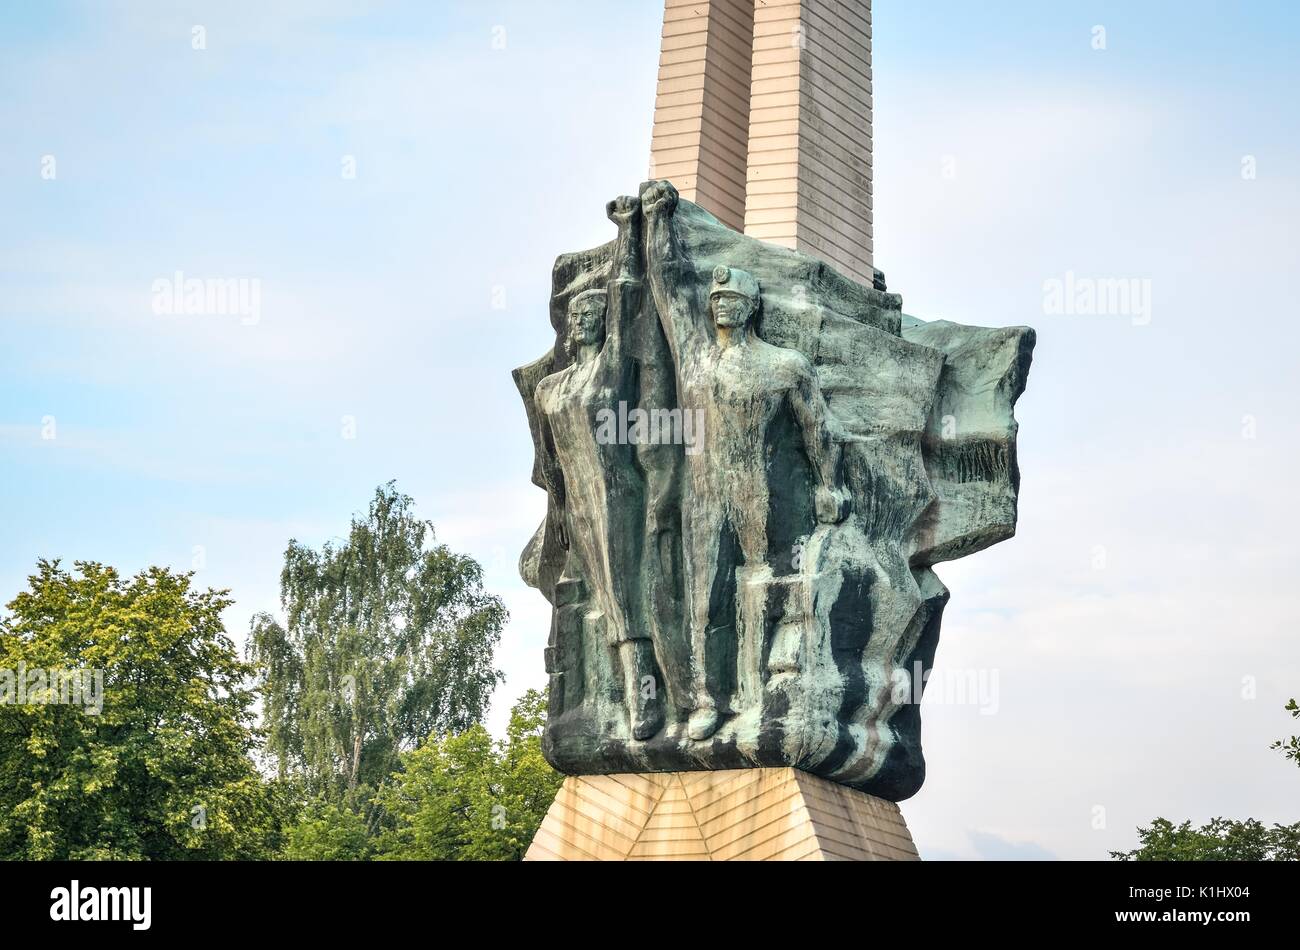 TYCHY, POLAND - JULY 7, 2017: Icon of Tychy city in Poland. Monument of struggle and work in a city park. Stock Photo